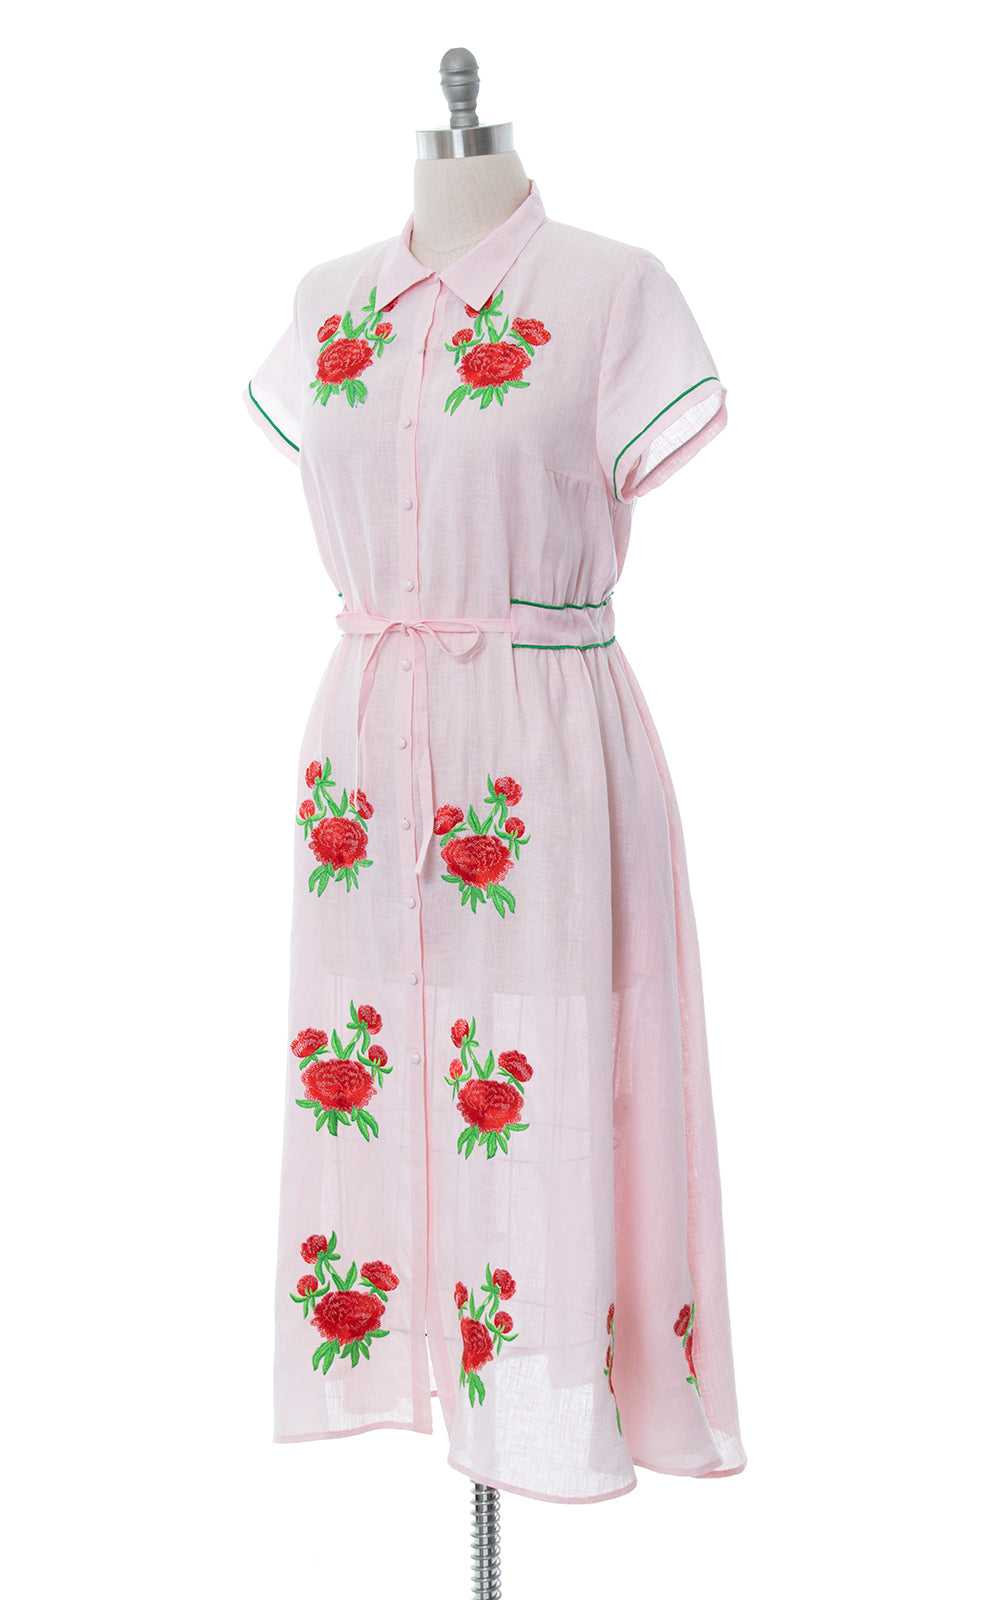 MODERN 1950s Style Embroidered Linen Dress | larg… - image 3